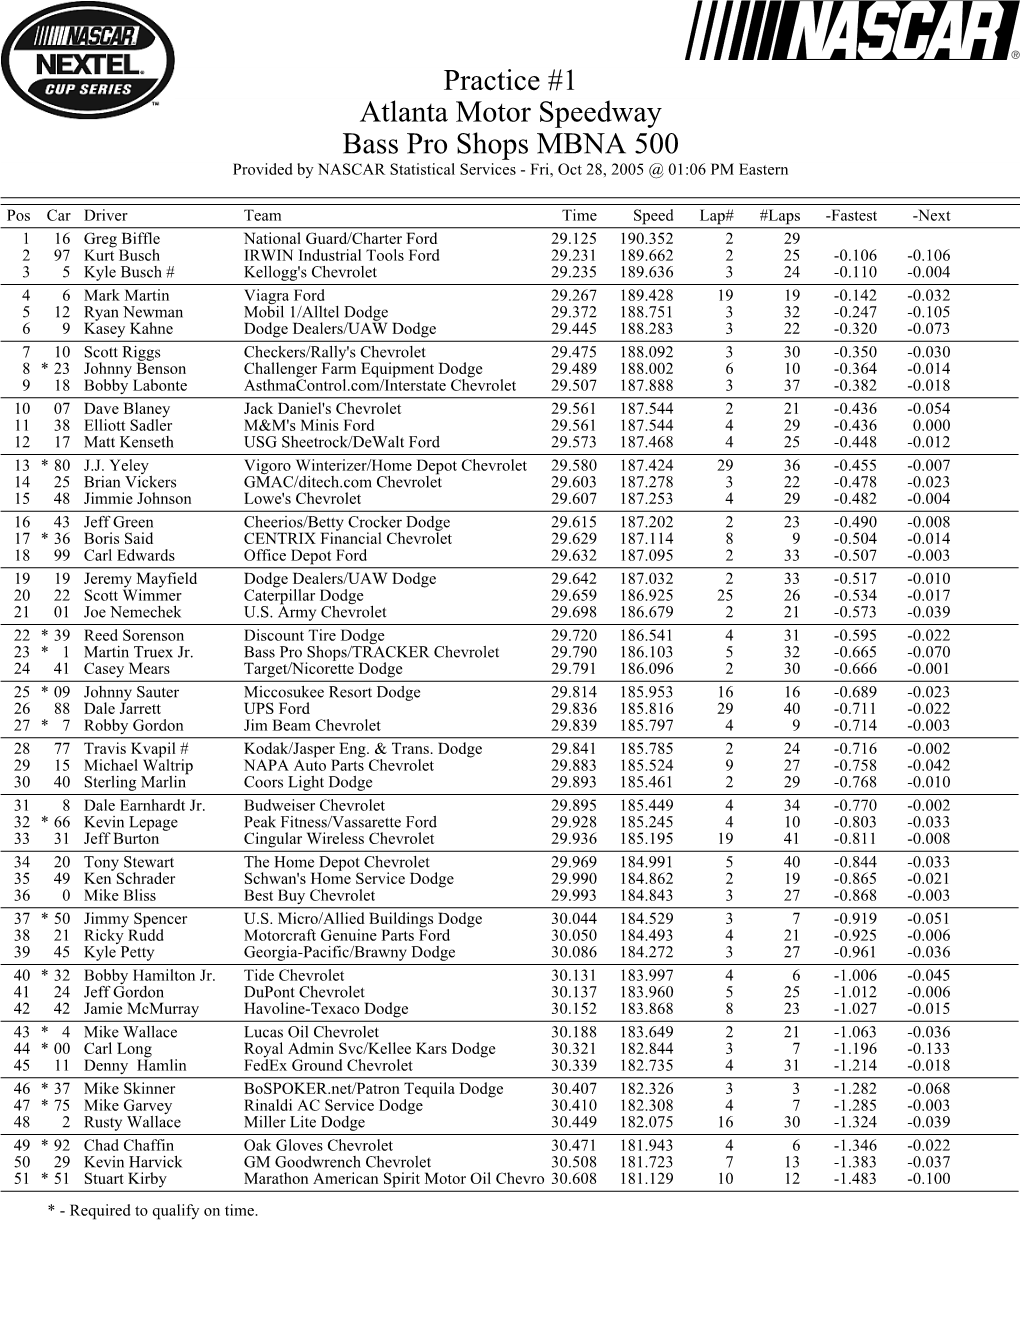 Practice #1 Atlanta Motor Speedway Bass Pro Shops MBNA 500 Provided by NASCAR Statistical Services - Fri, Oct 28, 2005 @ 01:06 PM Eastern